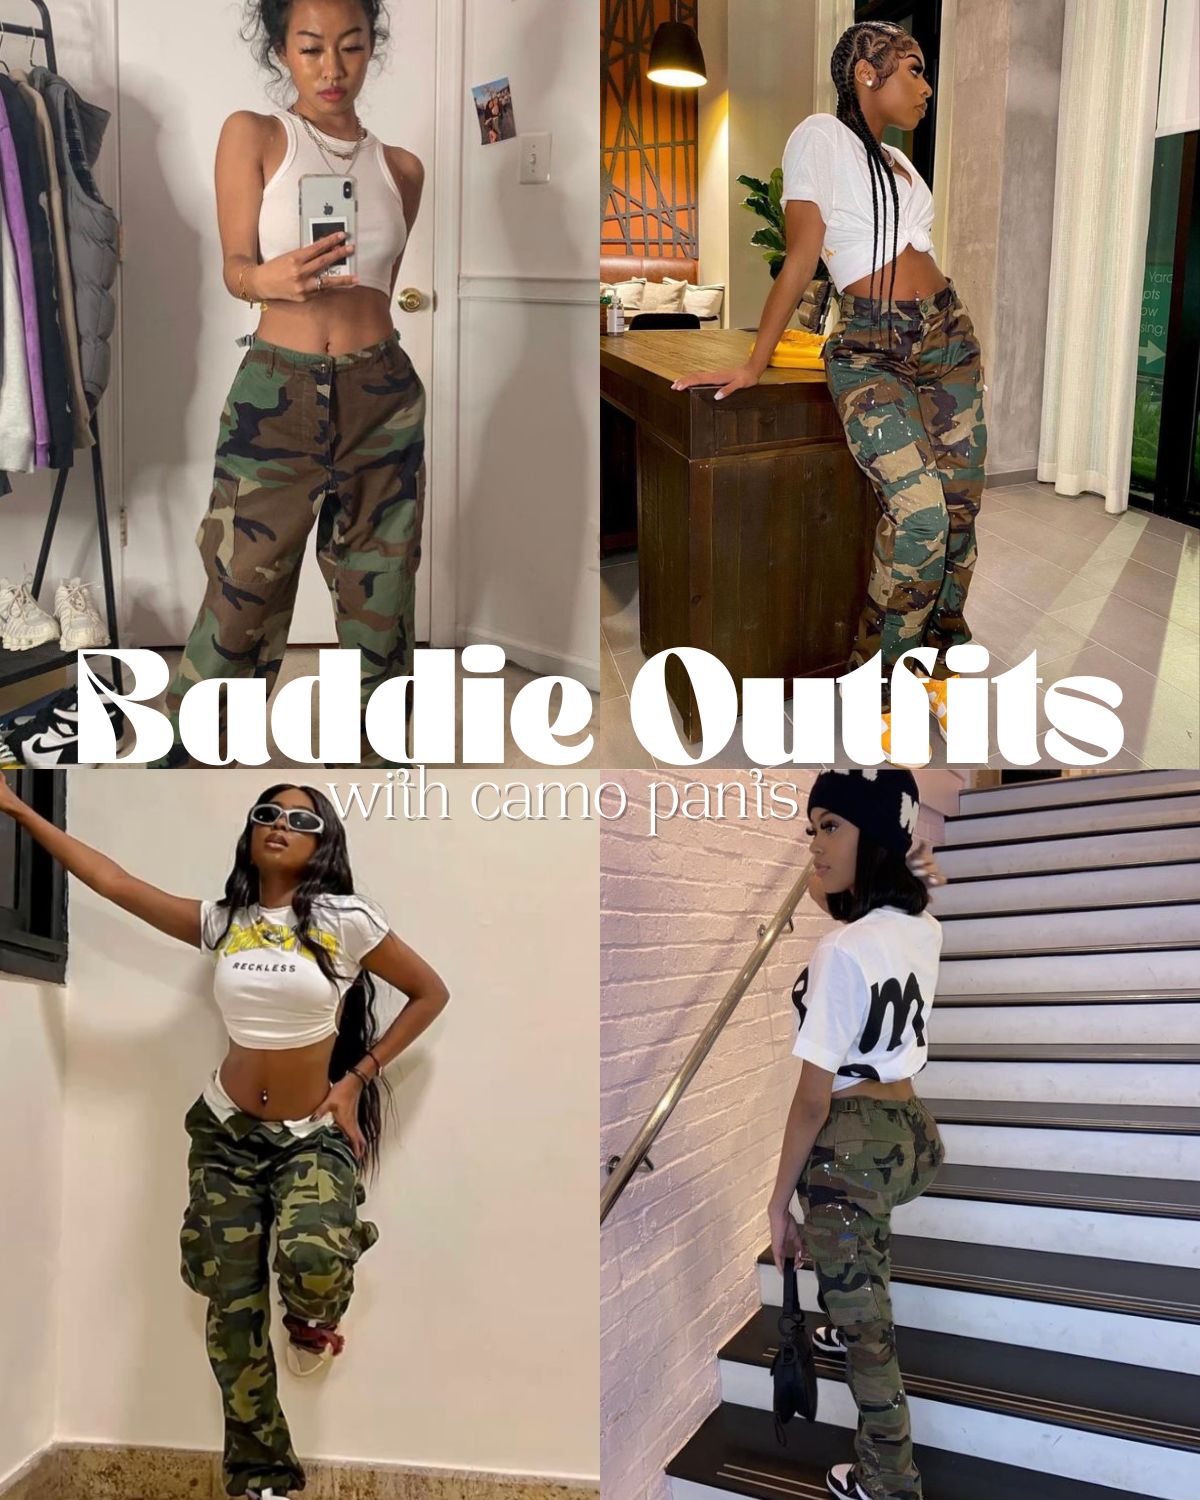 Four baddie outfits